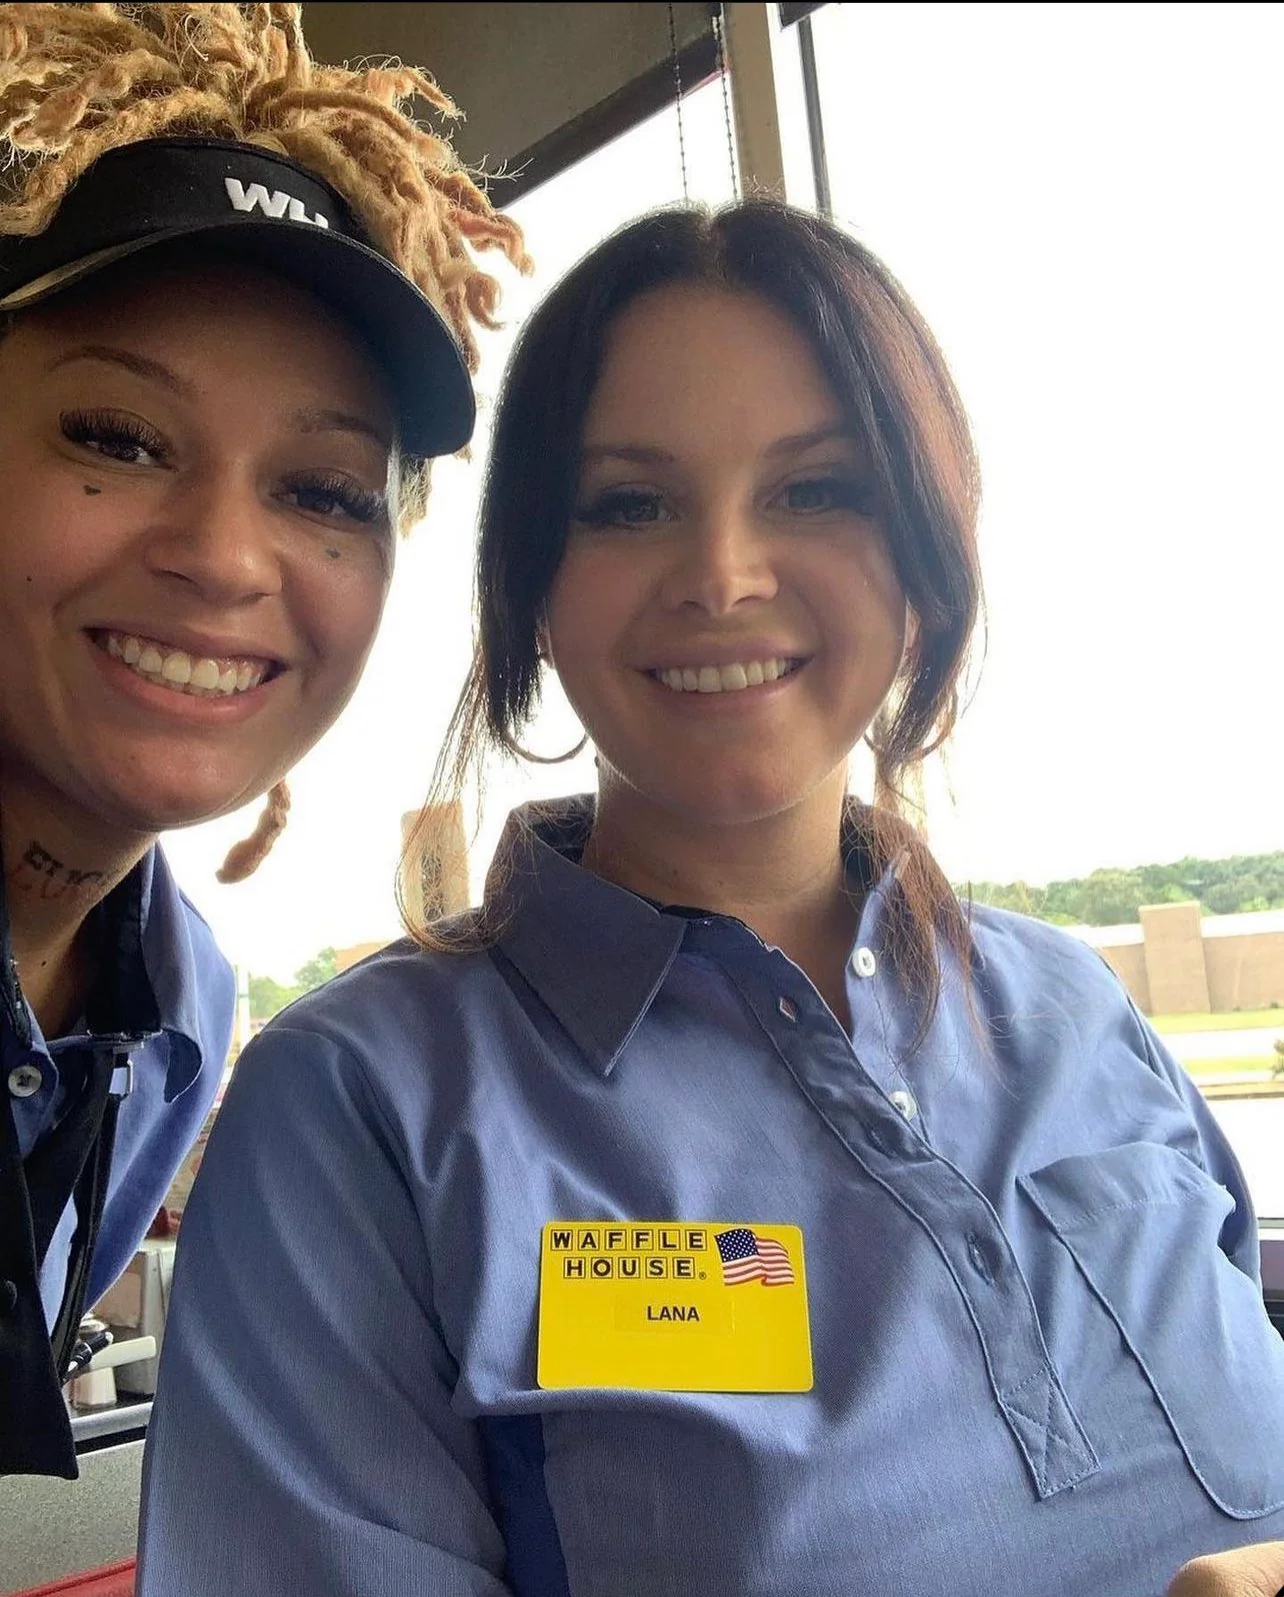 Lana Del Rey with her coworker at Waffle House